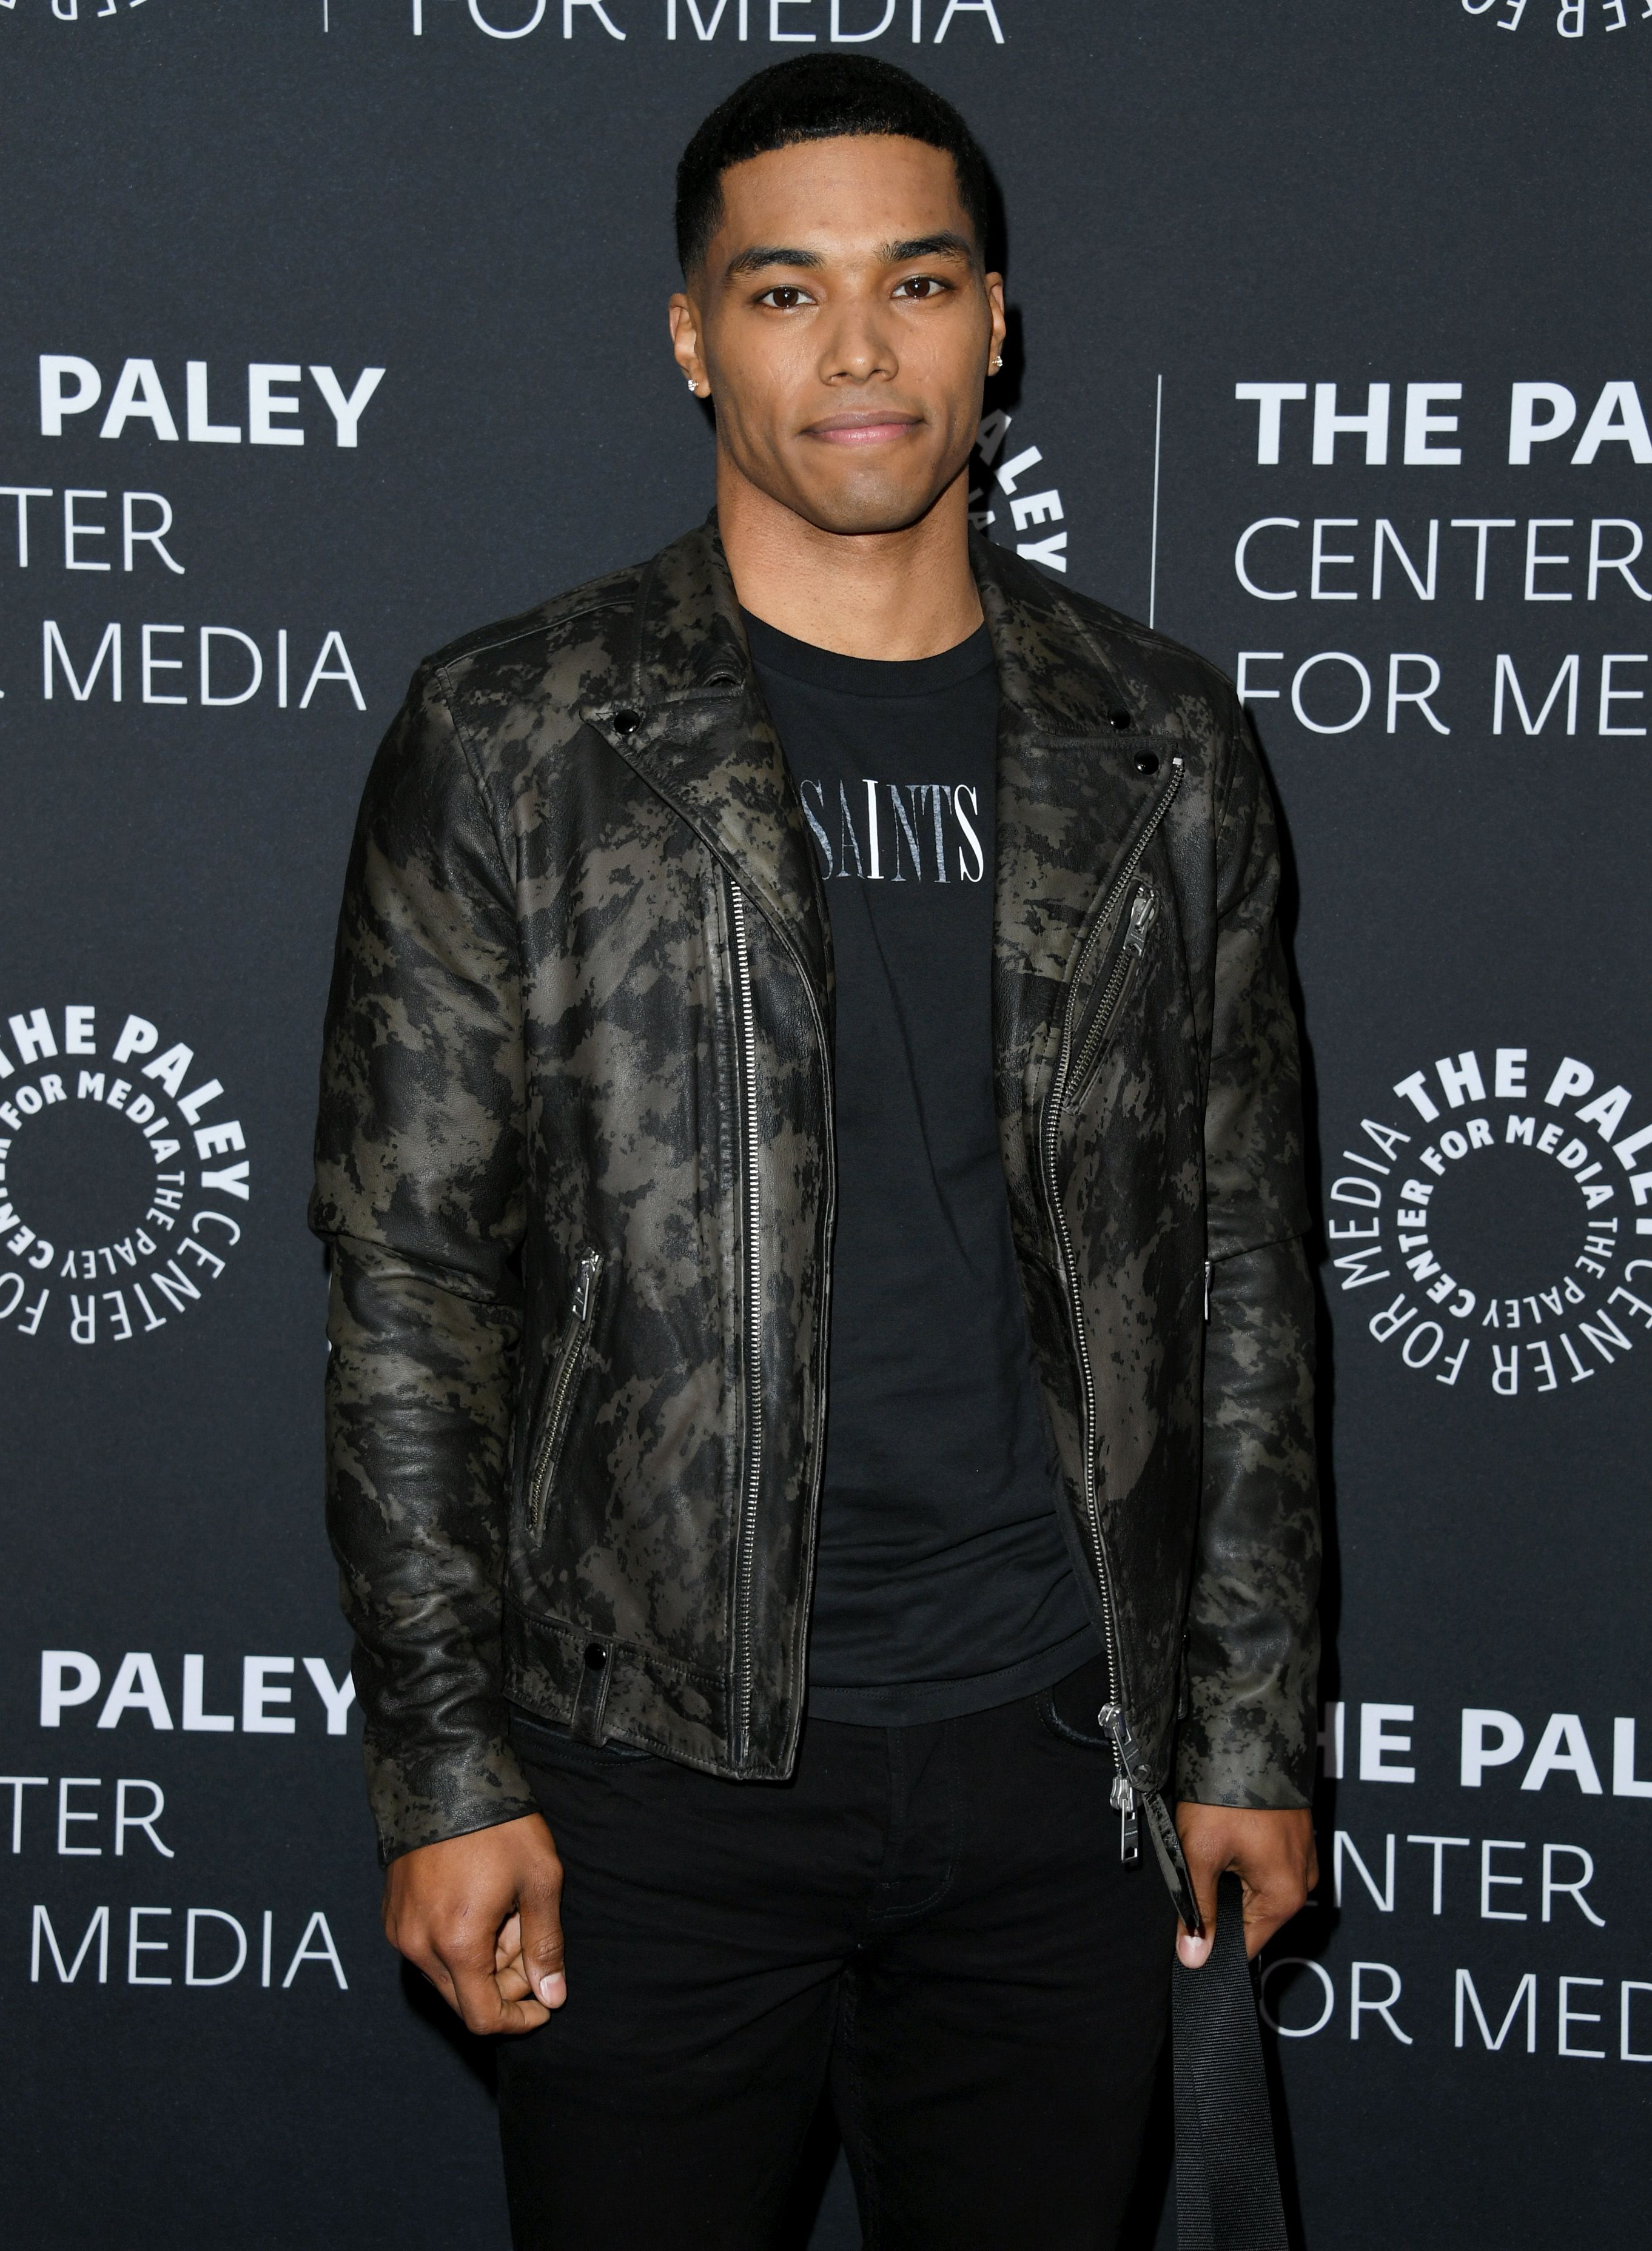 Rome Flynn at the premiere of the last season of "How To Get Away With Murder" in November 2019 in Beverly Hills | Source: Getty Images